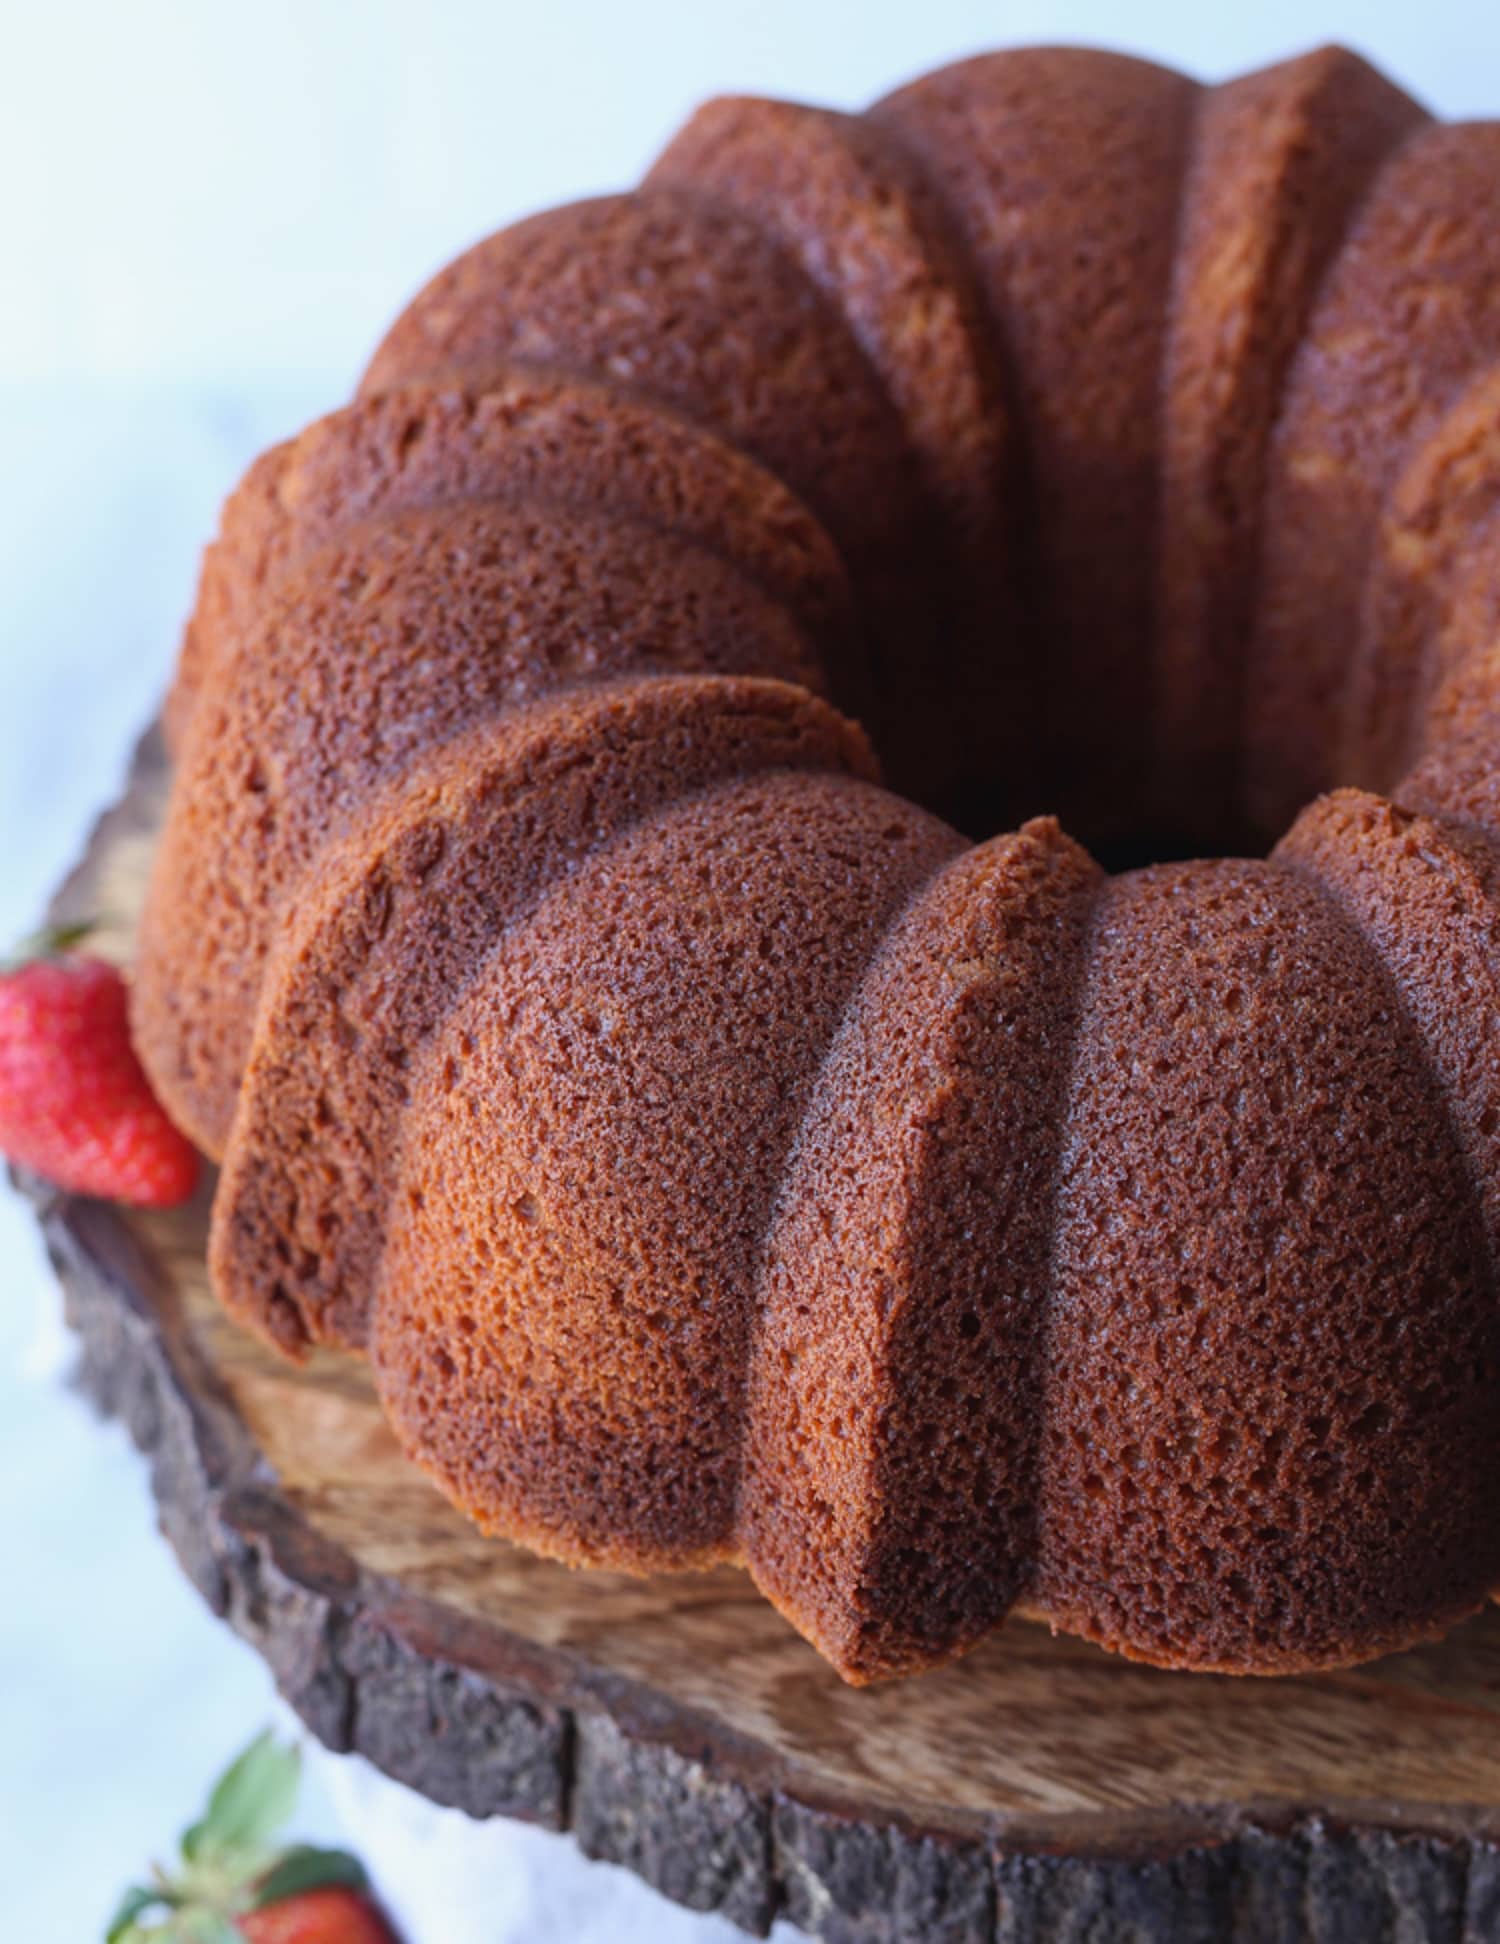 A pound cake baked in a bundt pan turned over on a wooden cake pedestal.